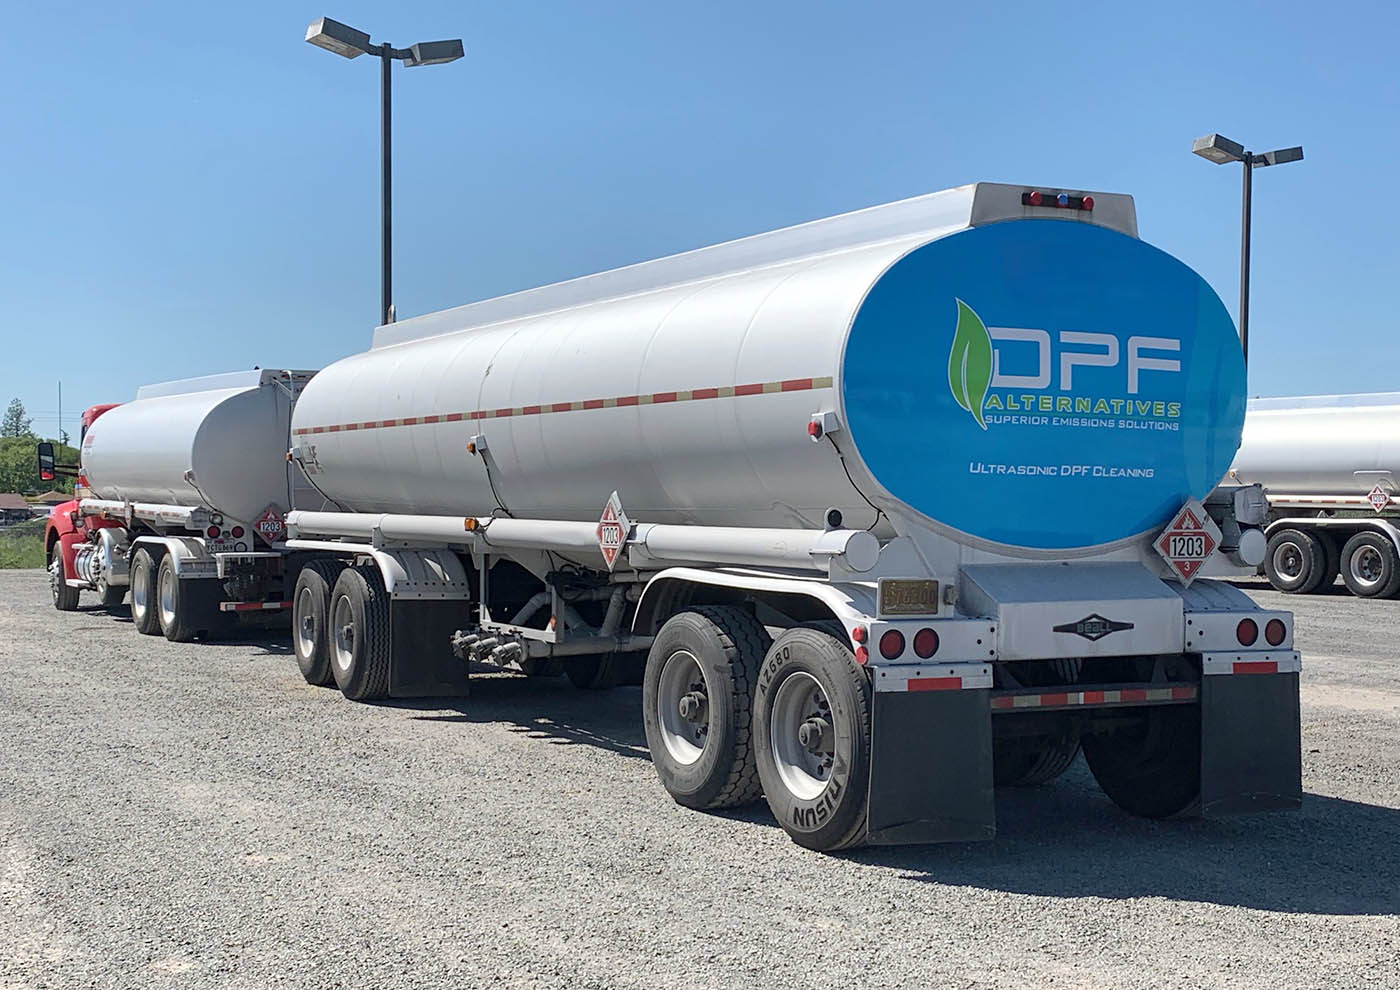 Back of a clean, large, reflective semi truck rig, contact DPF Alternatives for a DPF cleaning in Jonesboro / Paragould.